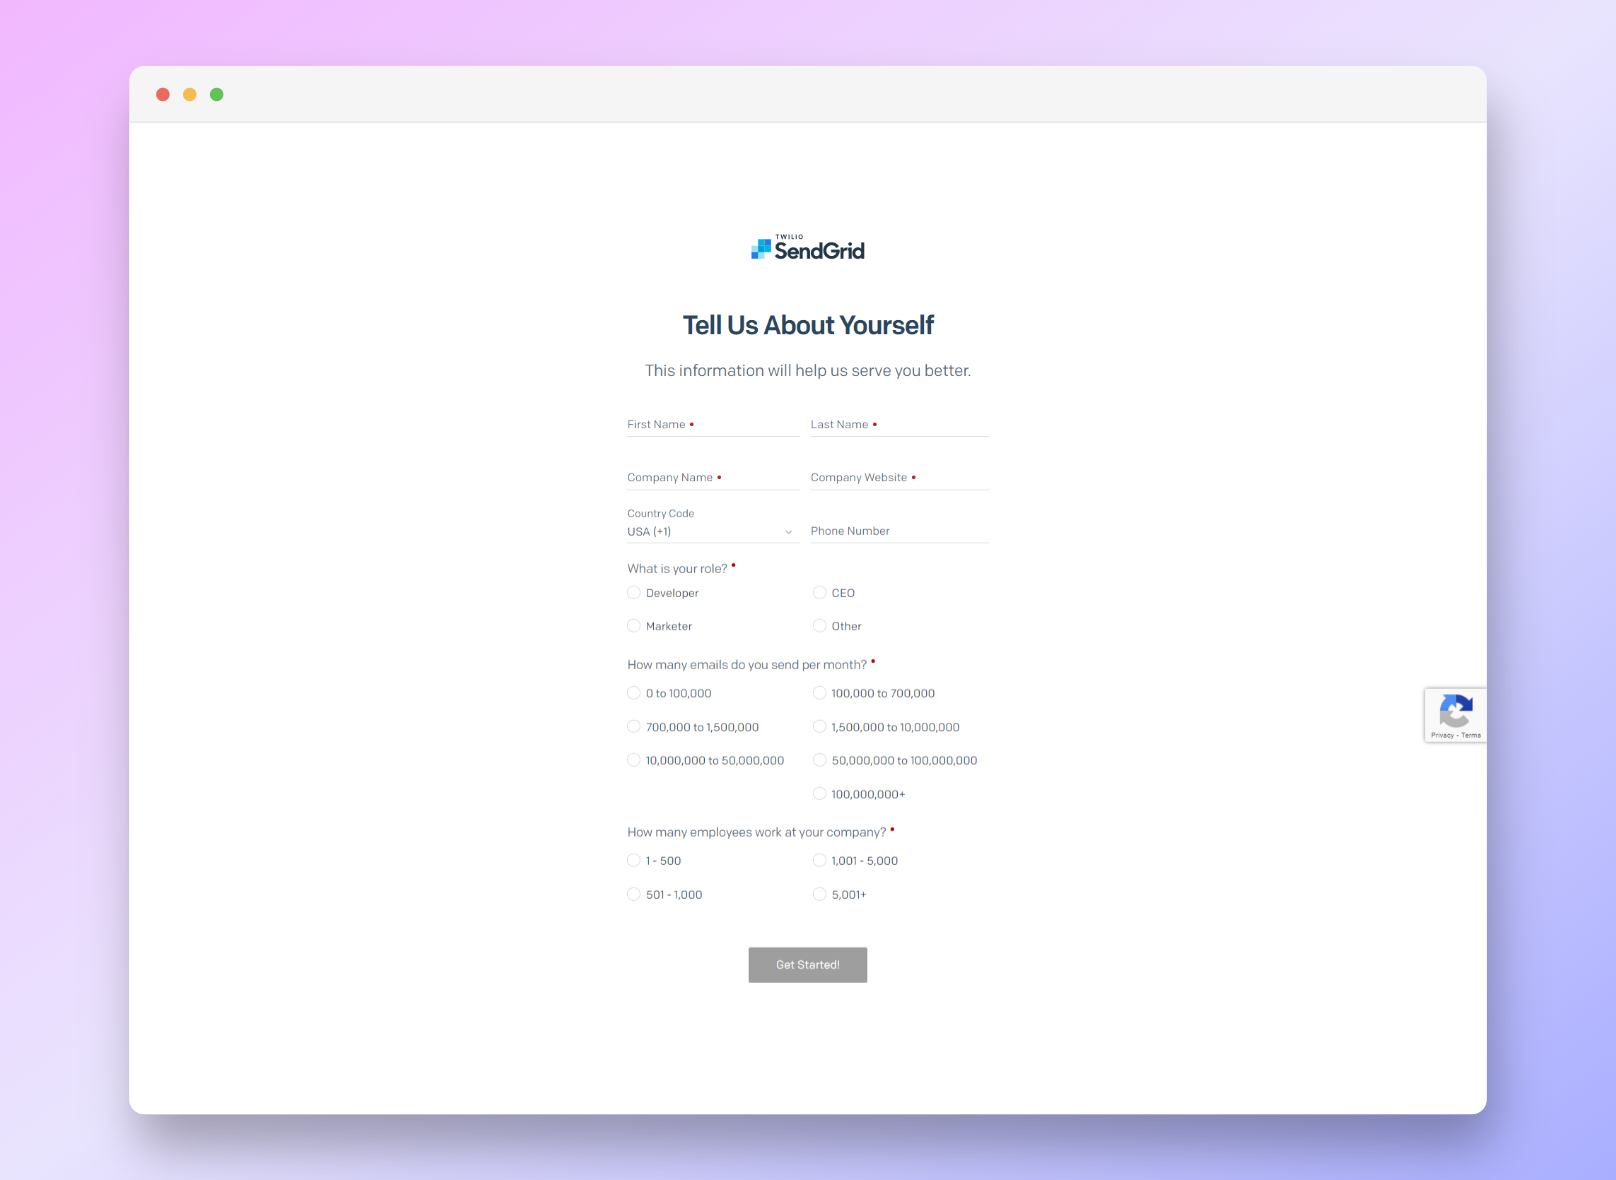 Some extra details is required to get started with sendgrid, fill in details and get started 